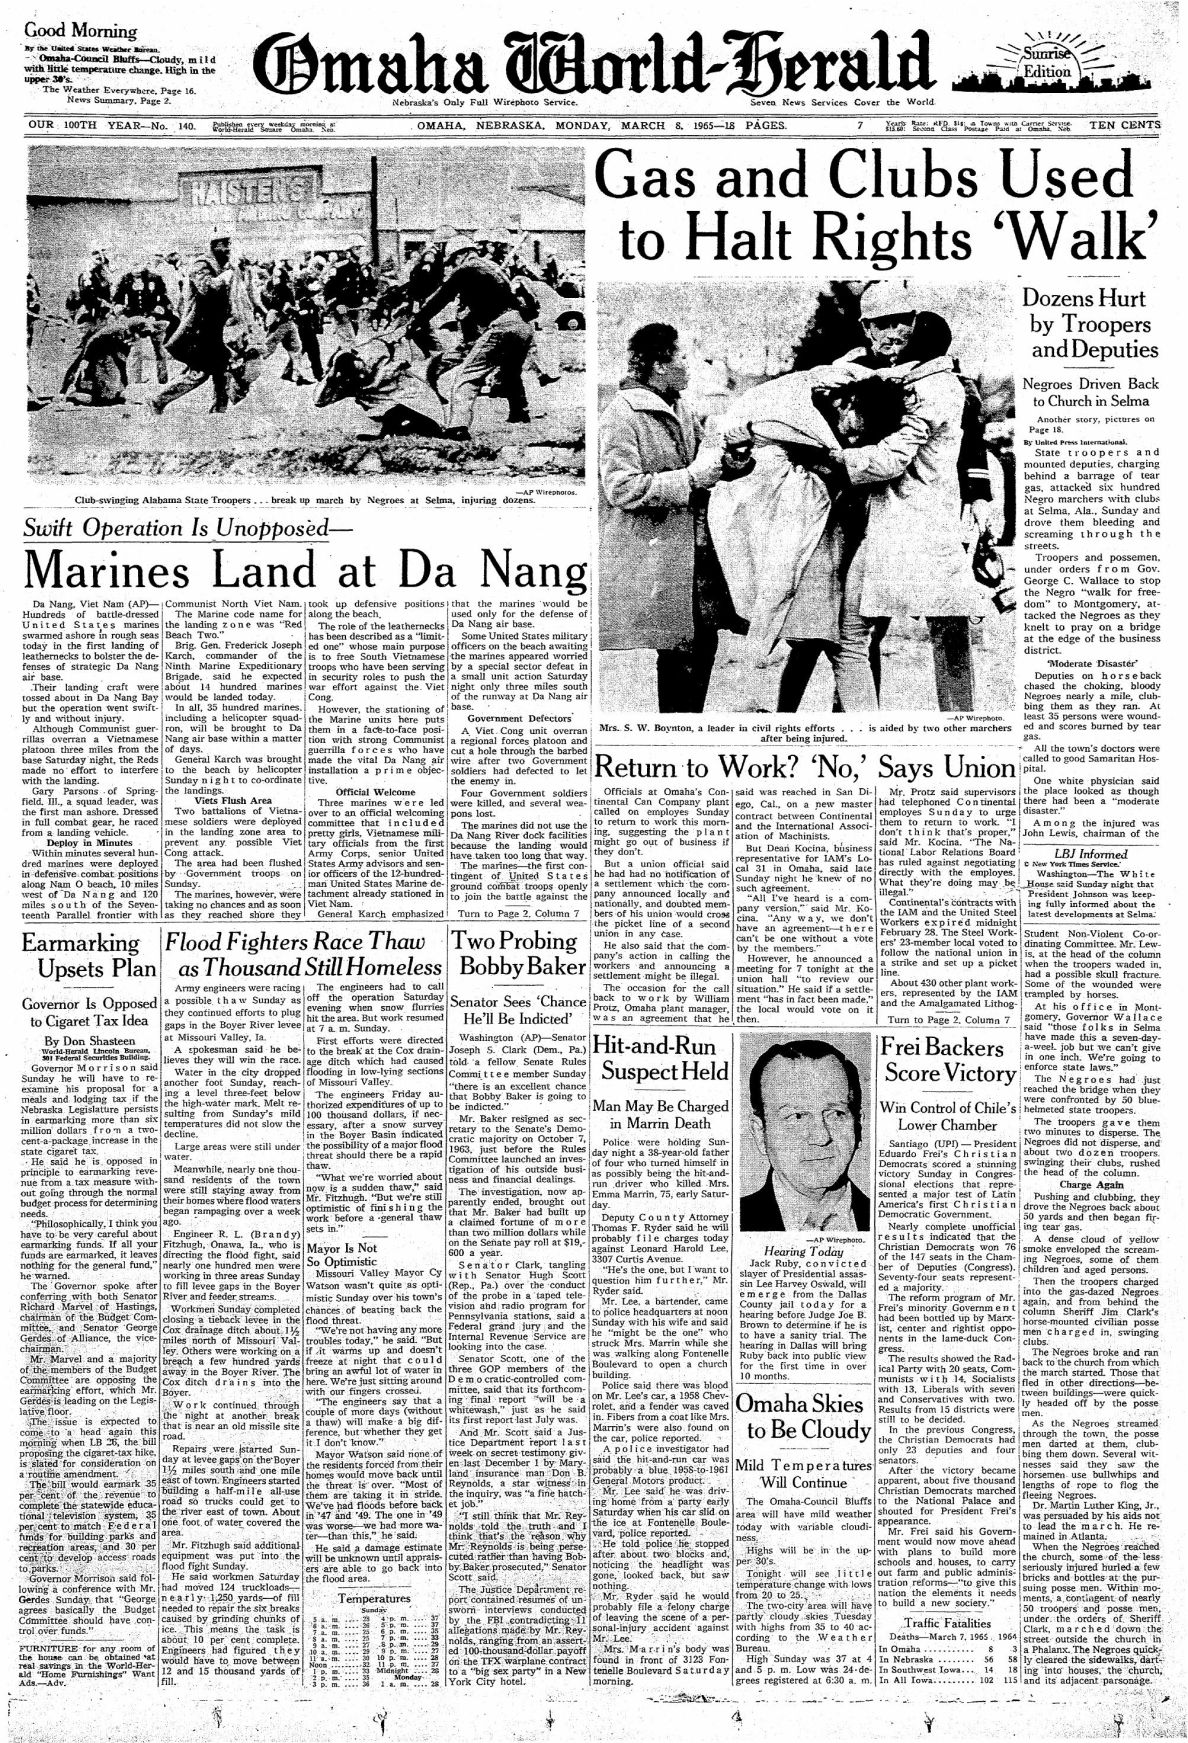 Omaha WorldHerald front page, March 8, 1965